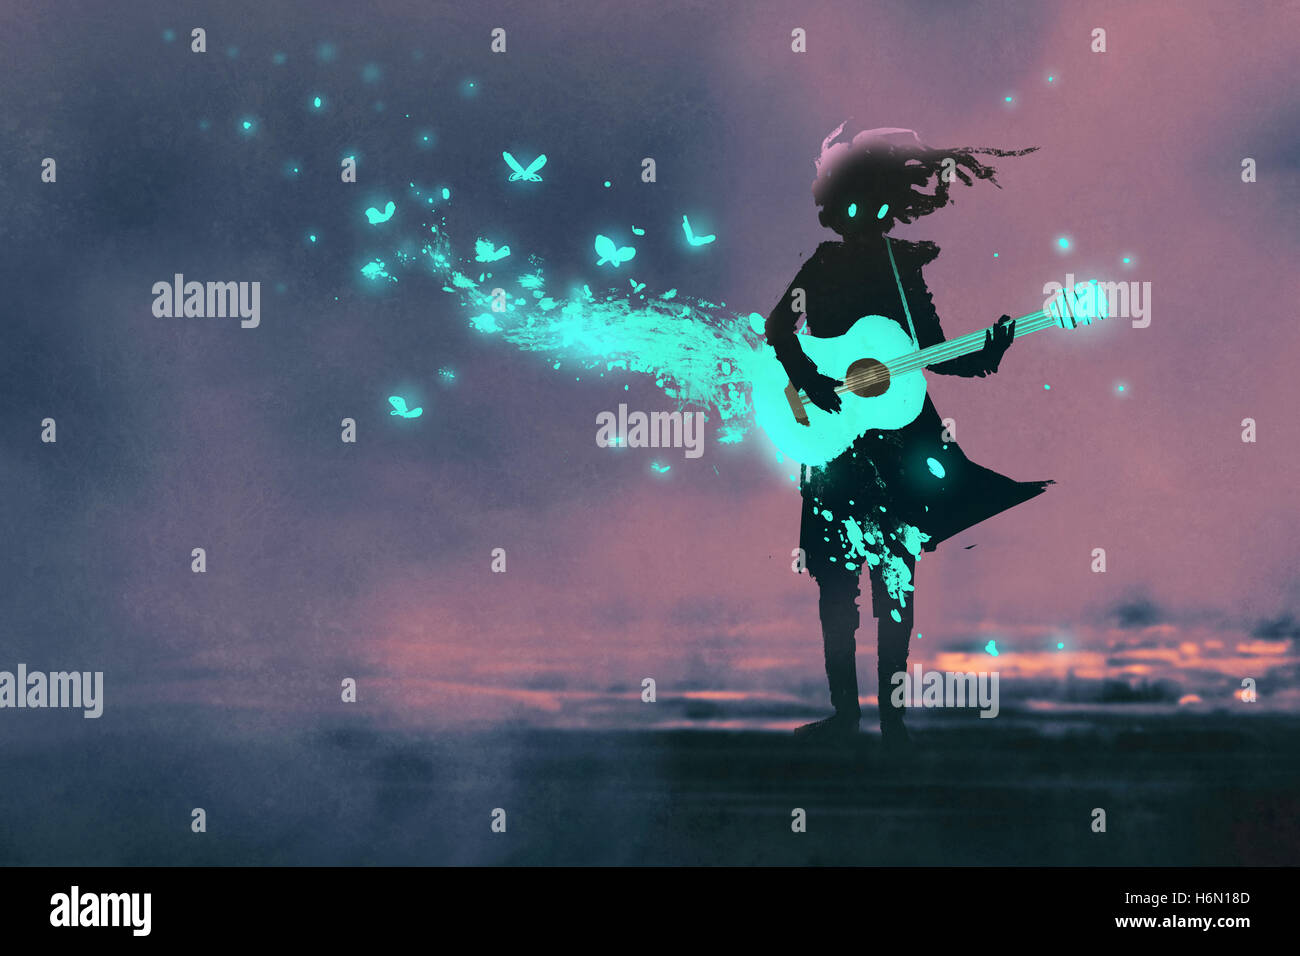 girl playing guitar with a blue light and glowing butterflies,illustration painting Stock Photo